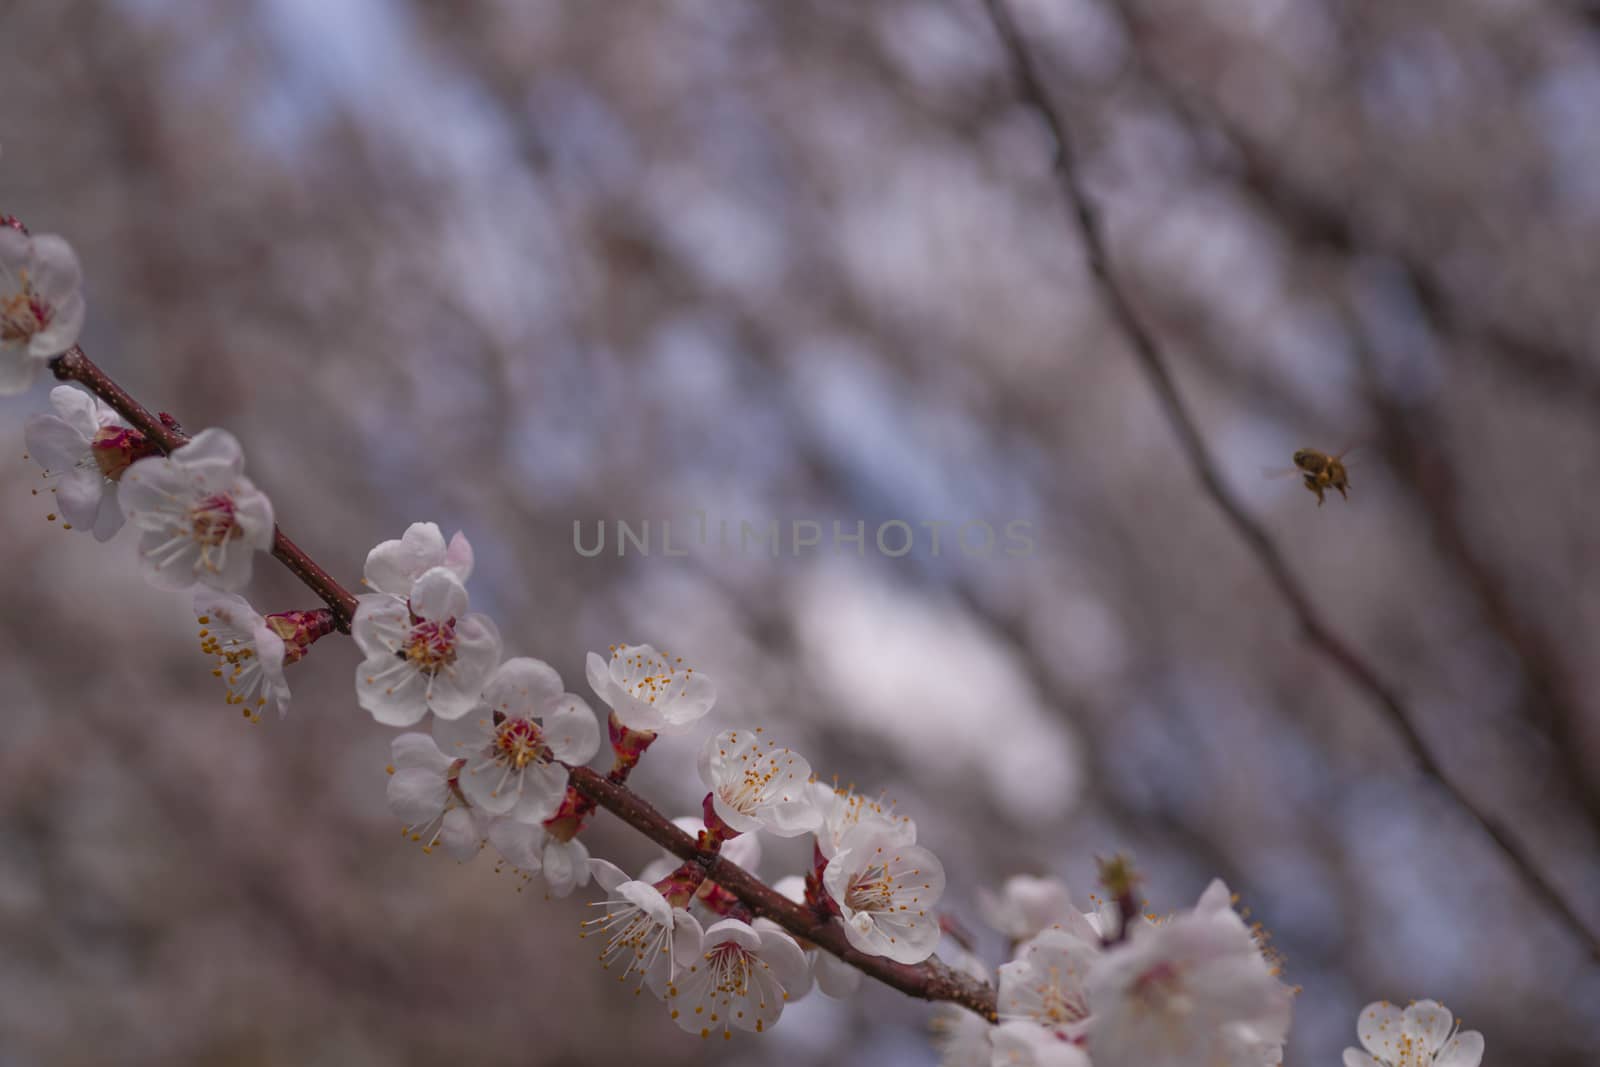 Apricot flower inflorescences on blurred background.